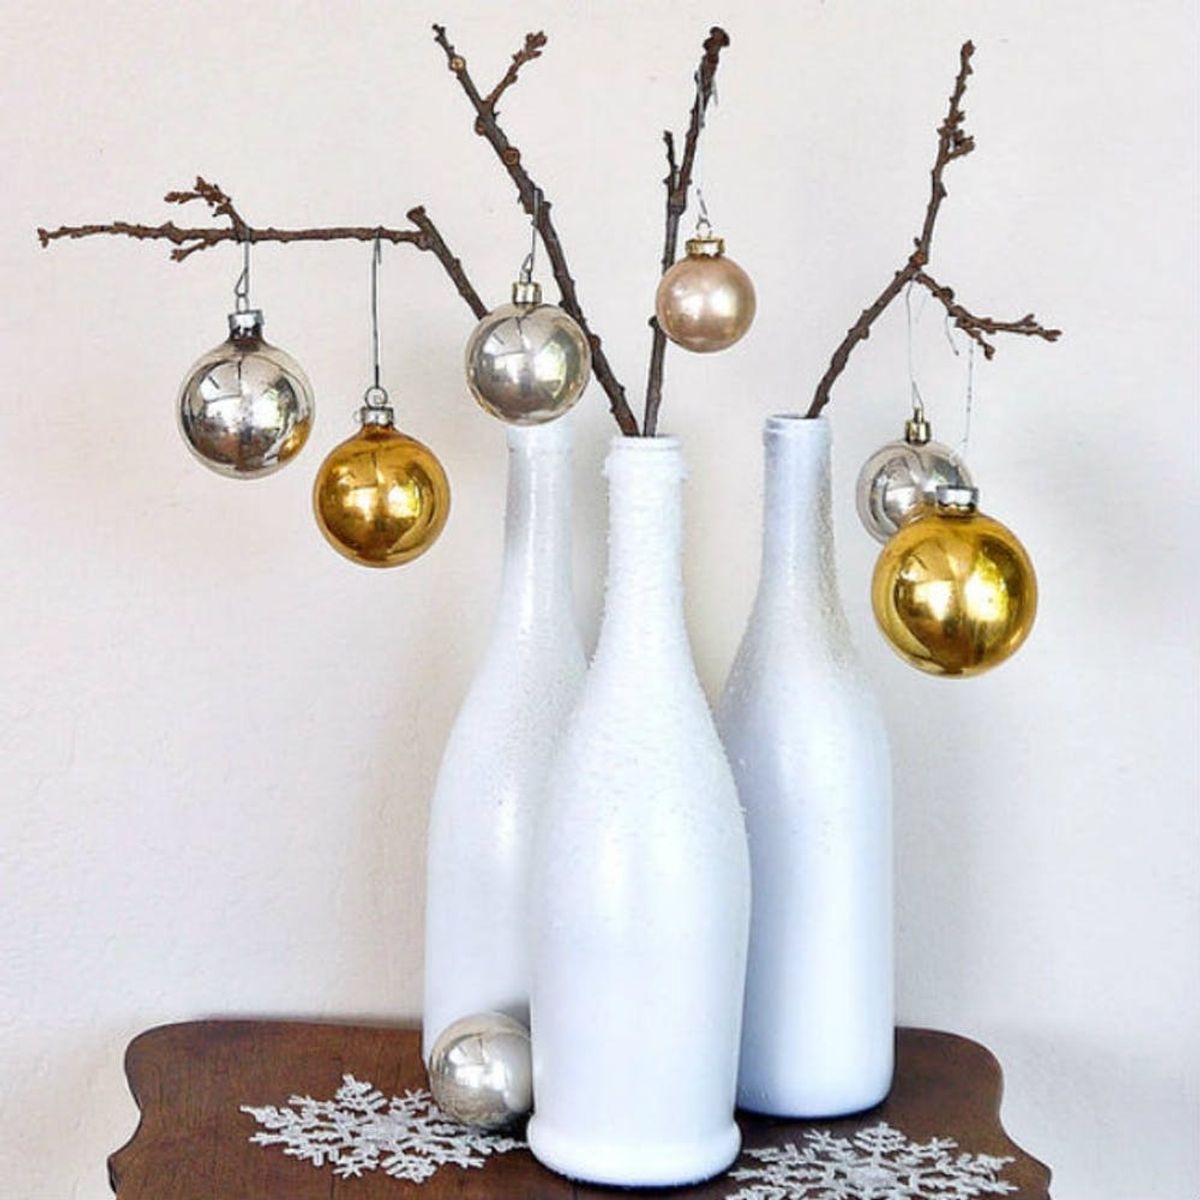 10 Ways to Upcycle Your Empty Wine Bottles for the Holidays